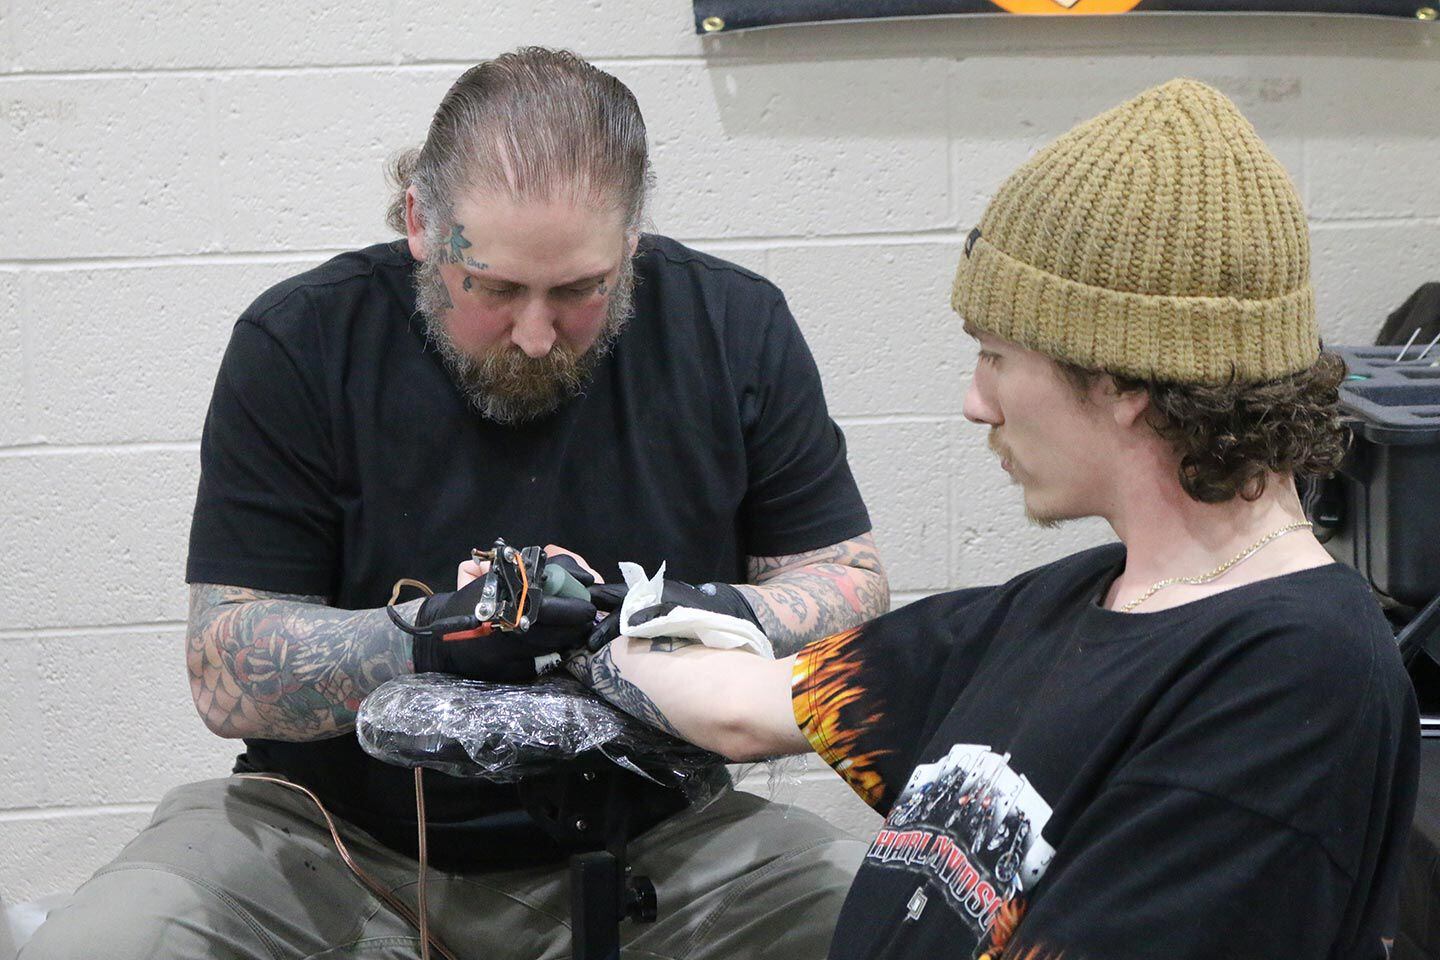 Tattoo artists were busy at the Cherry City Classic because there were lots of riders looking to get new ink.